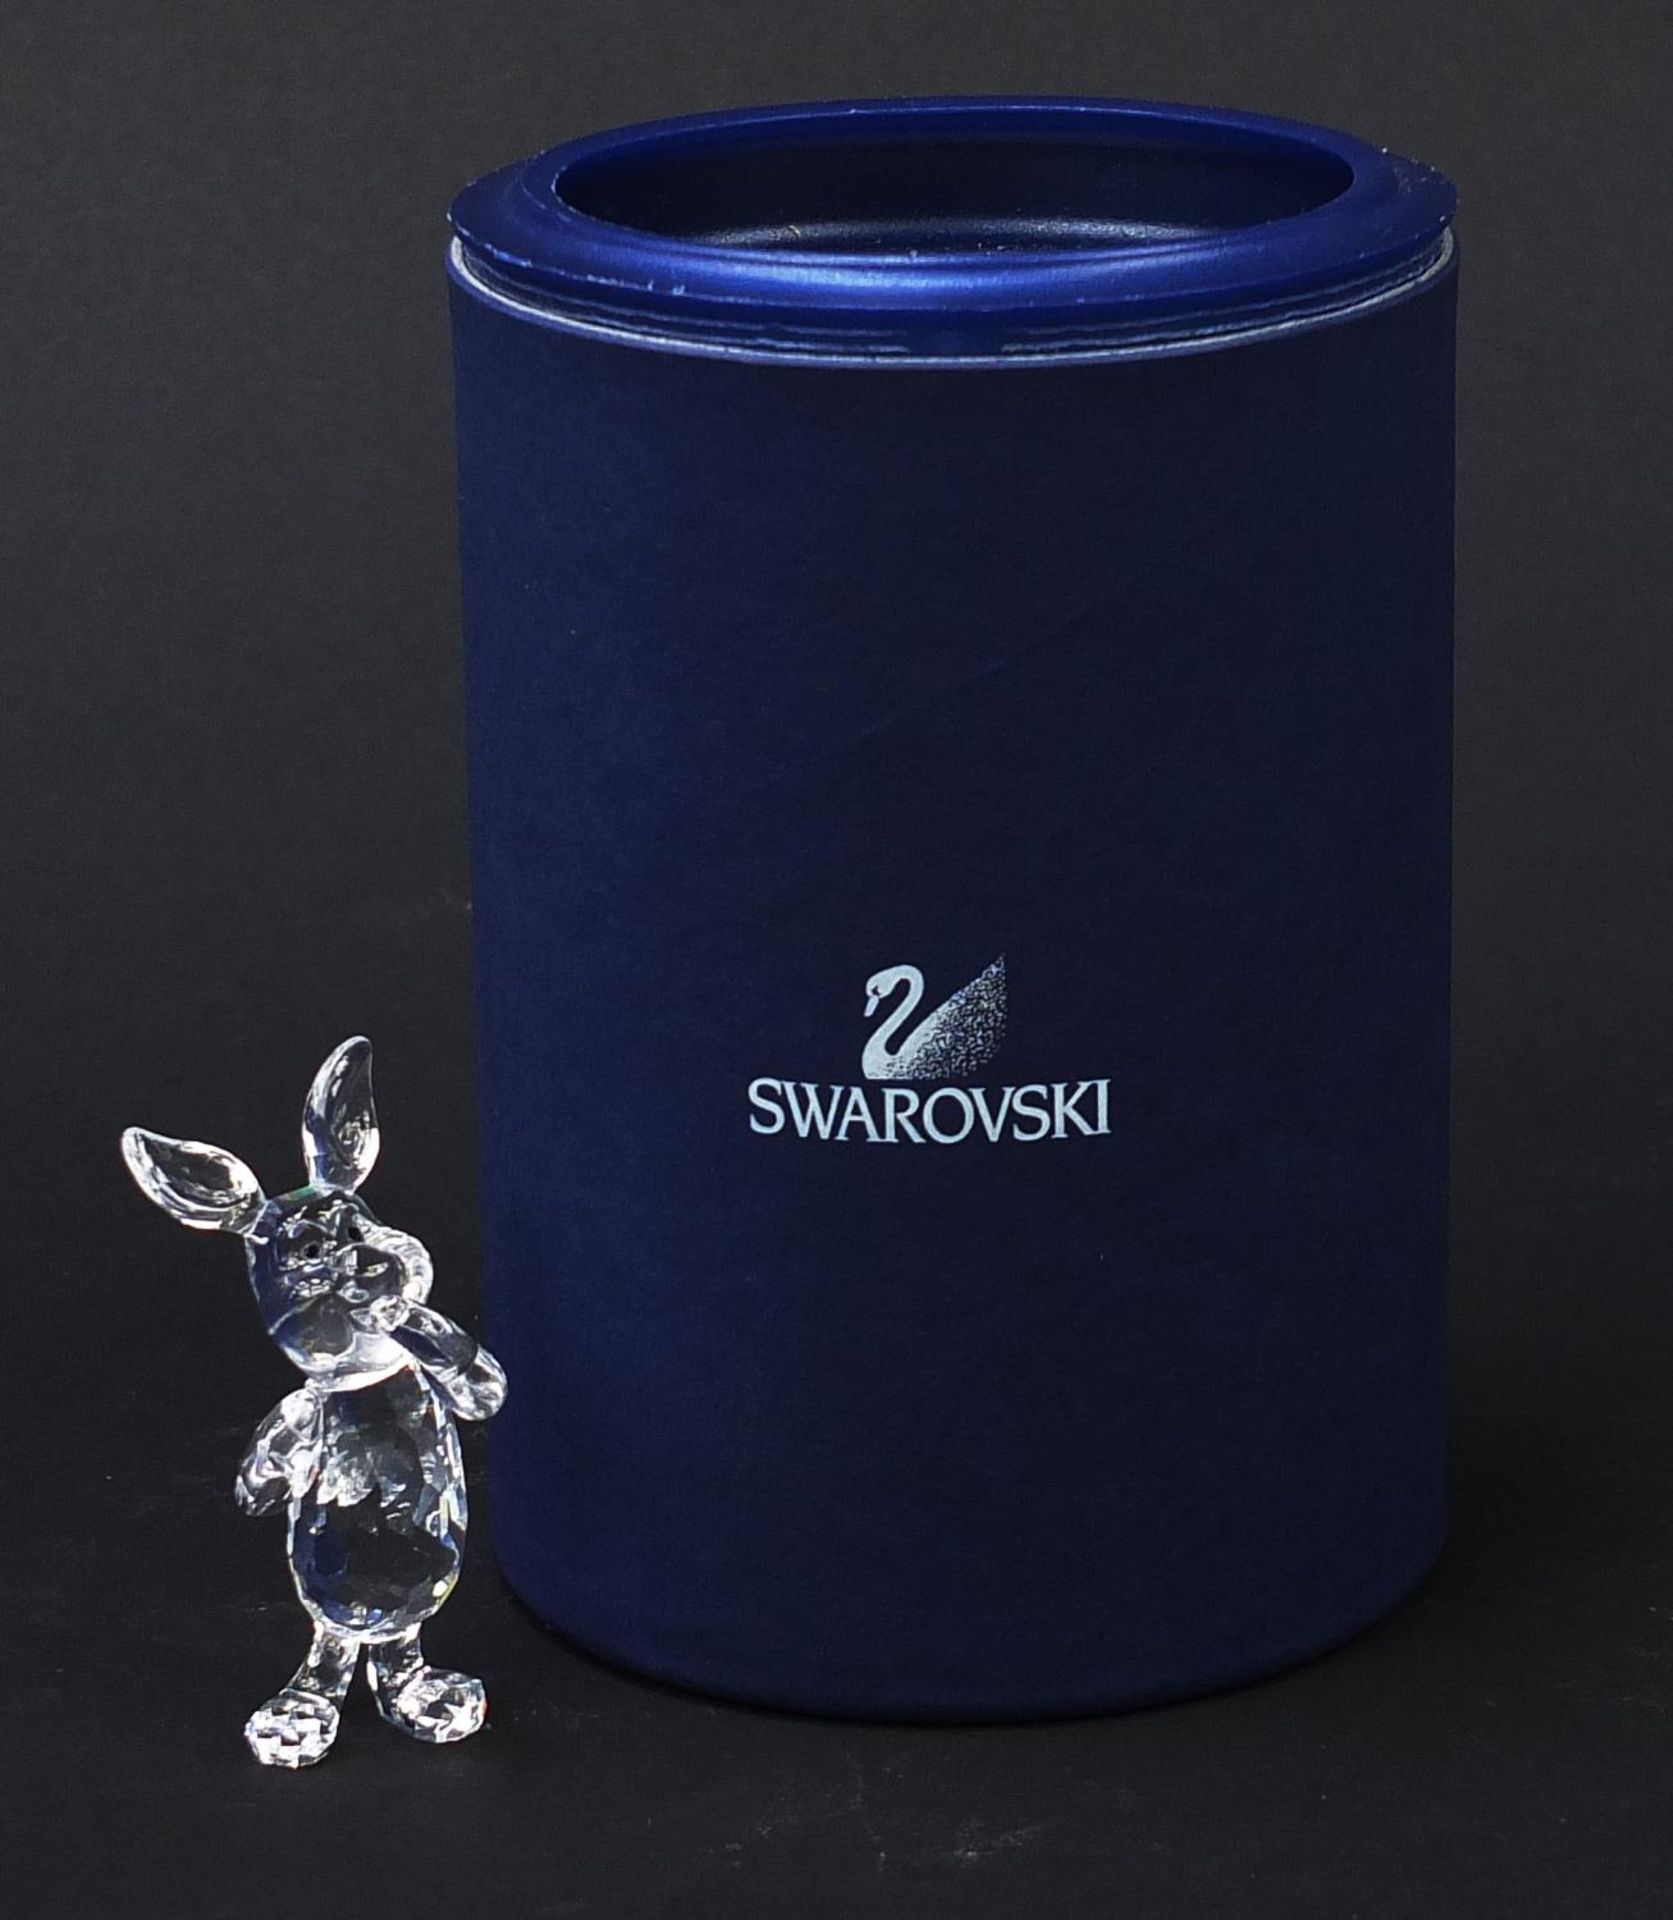 Swarovski Crystal Piglet from Winnie the Pooh with box, 5.5cm high : For Further Condition Reports - Image 2 of 5